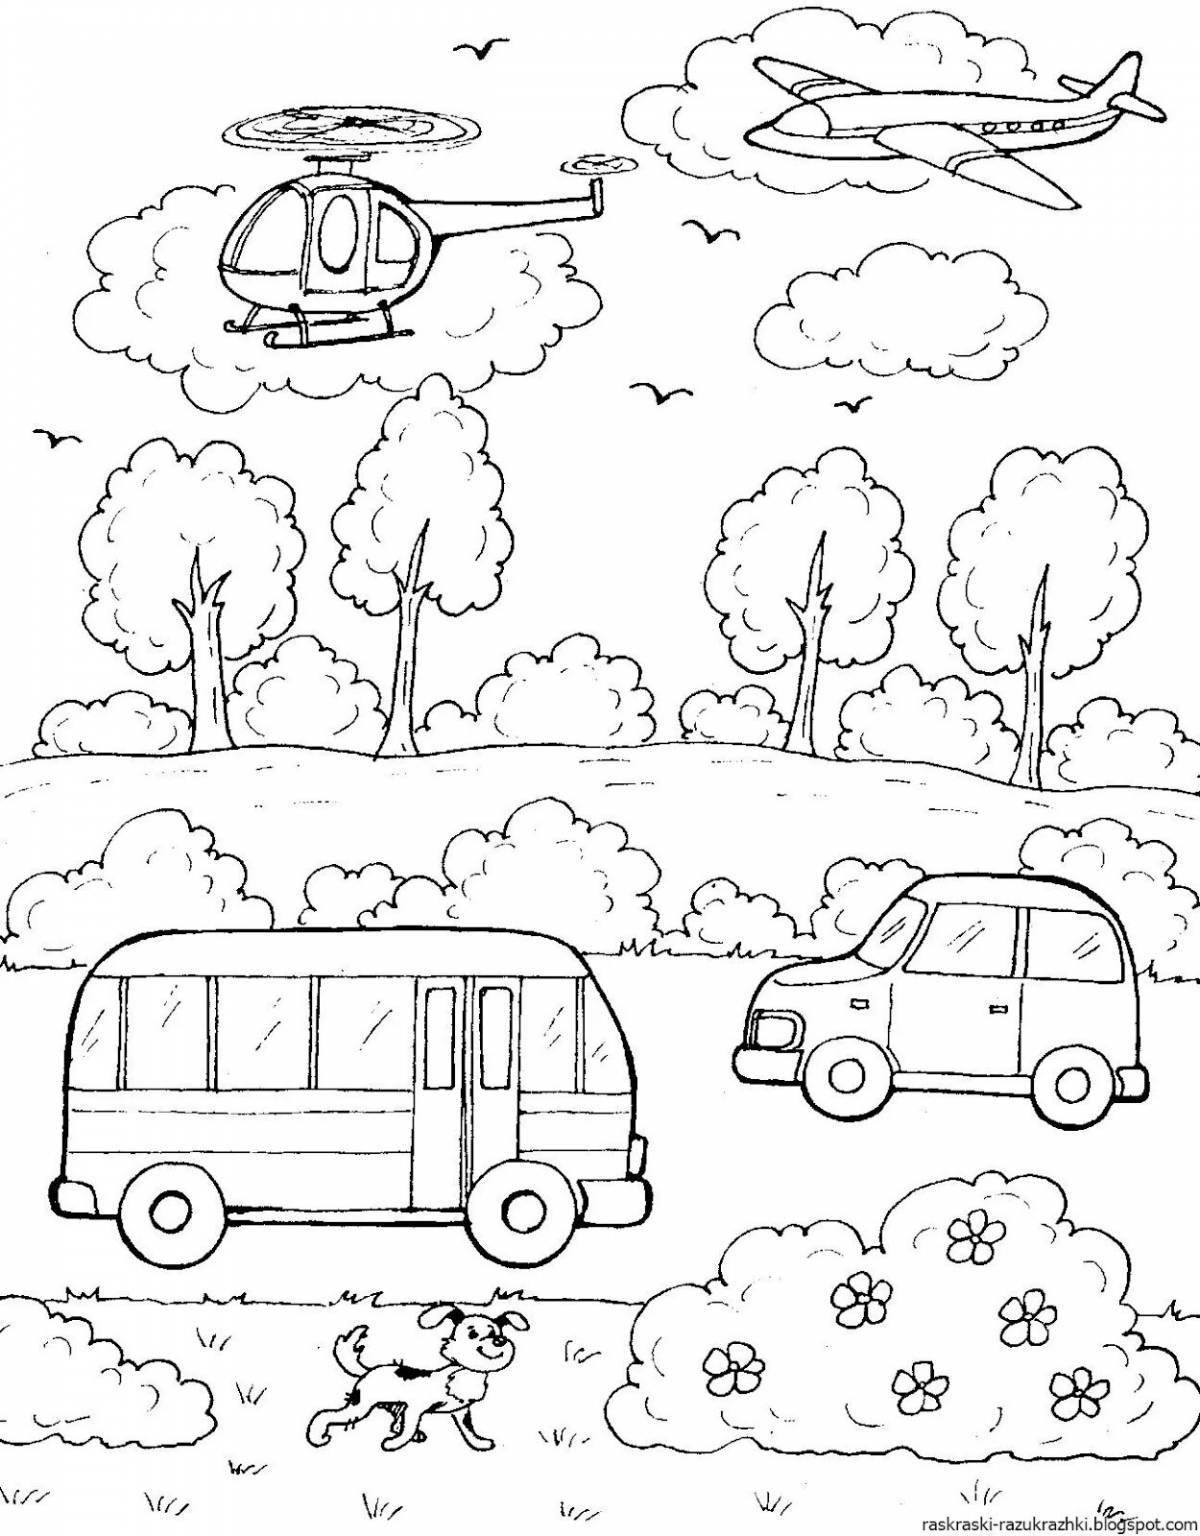 Bright transport coloring book for kids